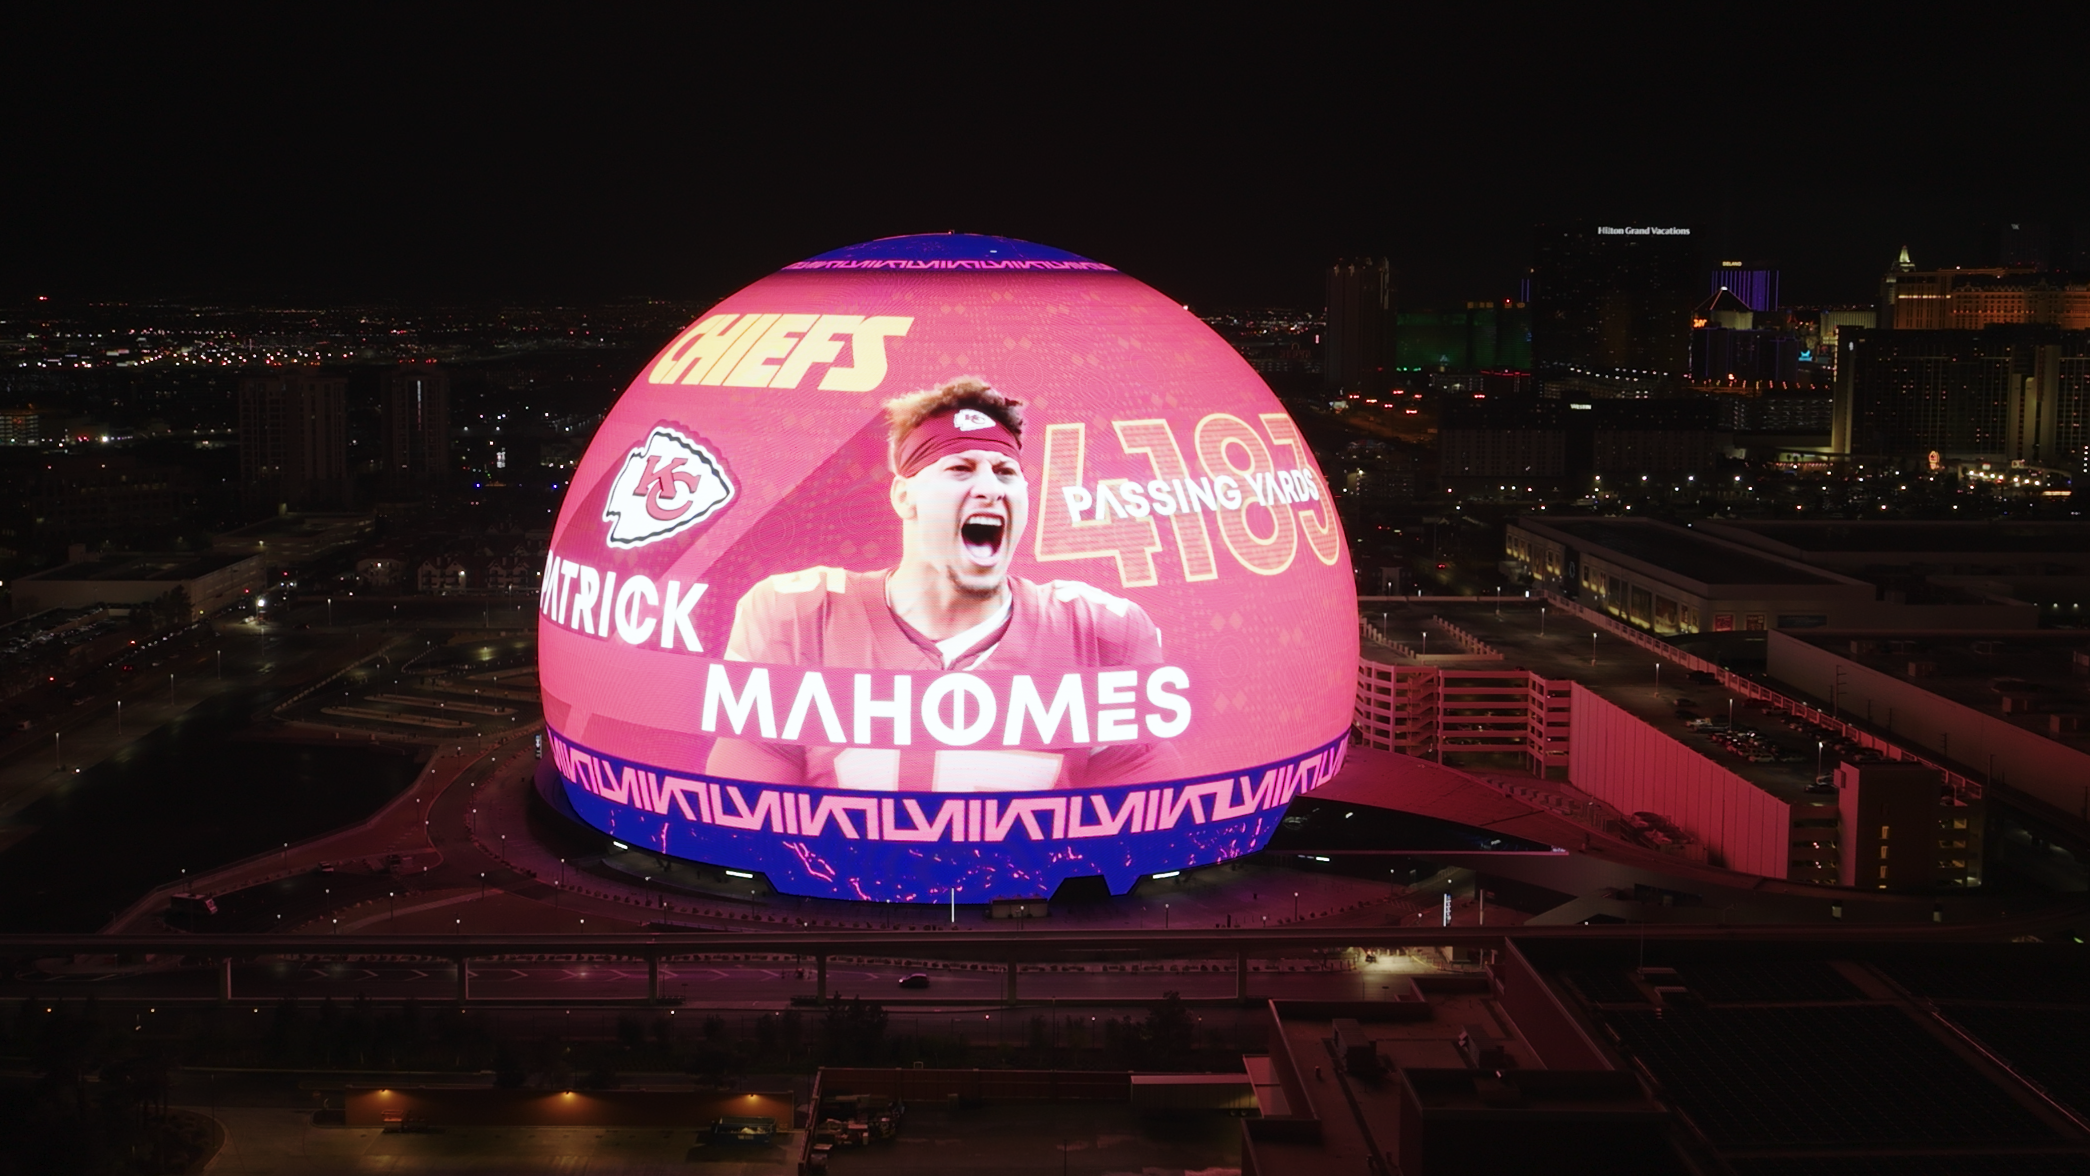 An image of Patrick Mahomes screaming with his stats are projected onto the Vegas Sphere.